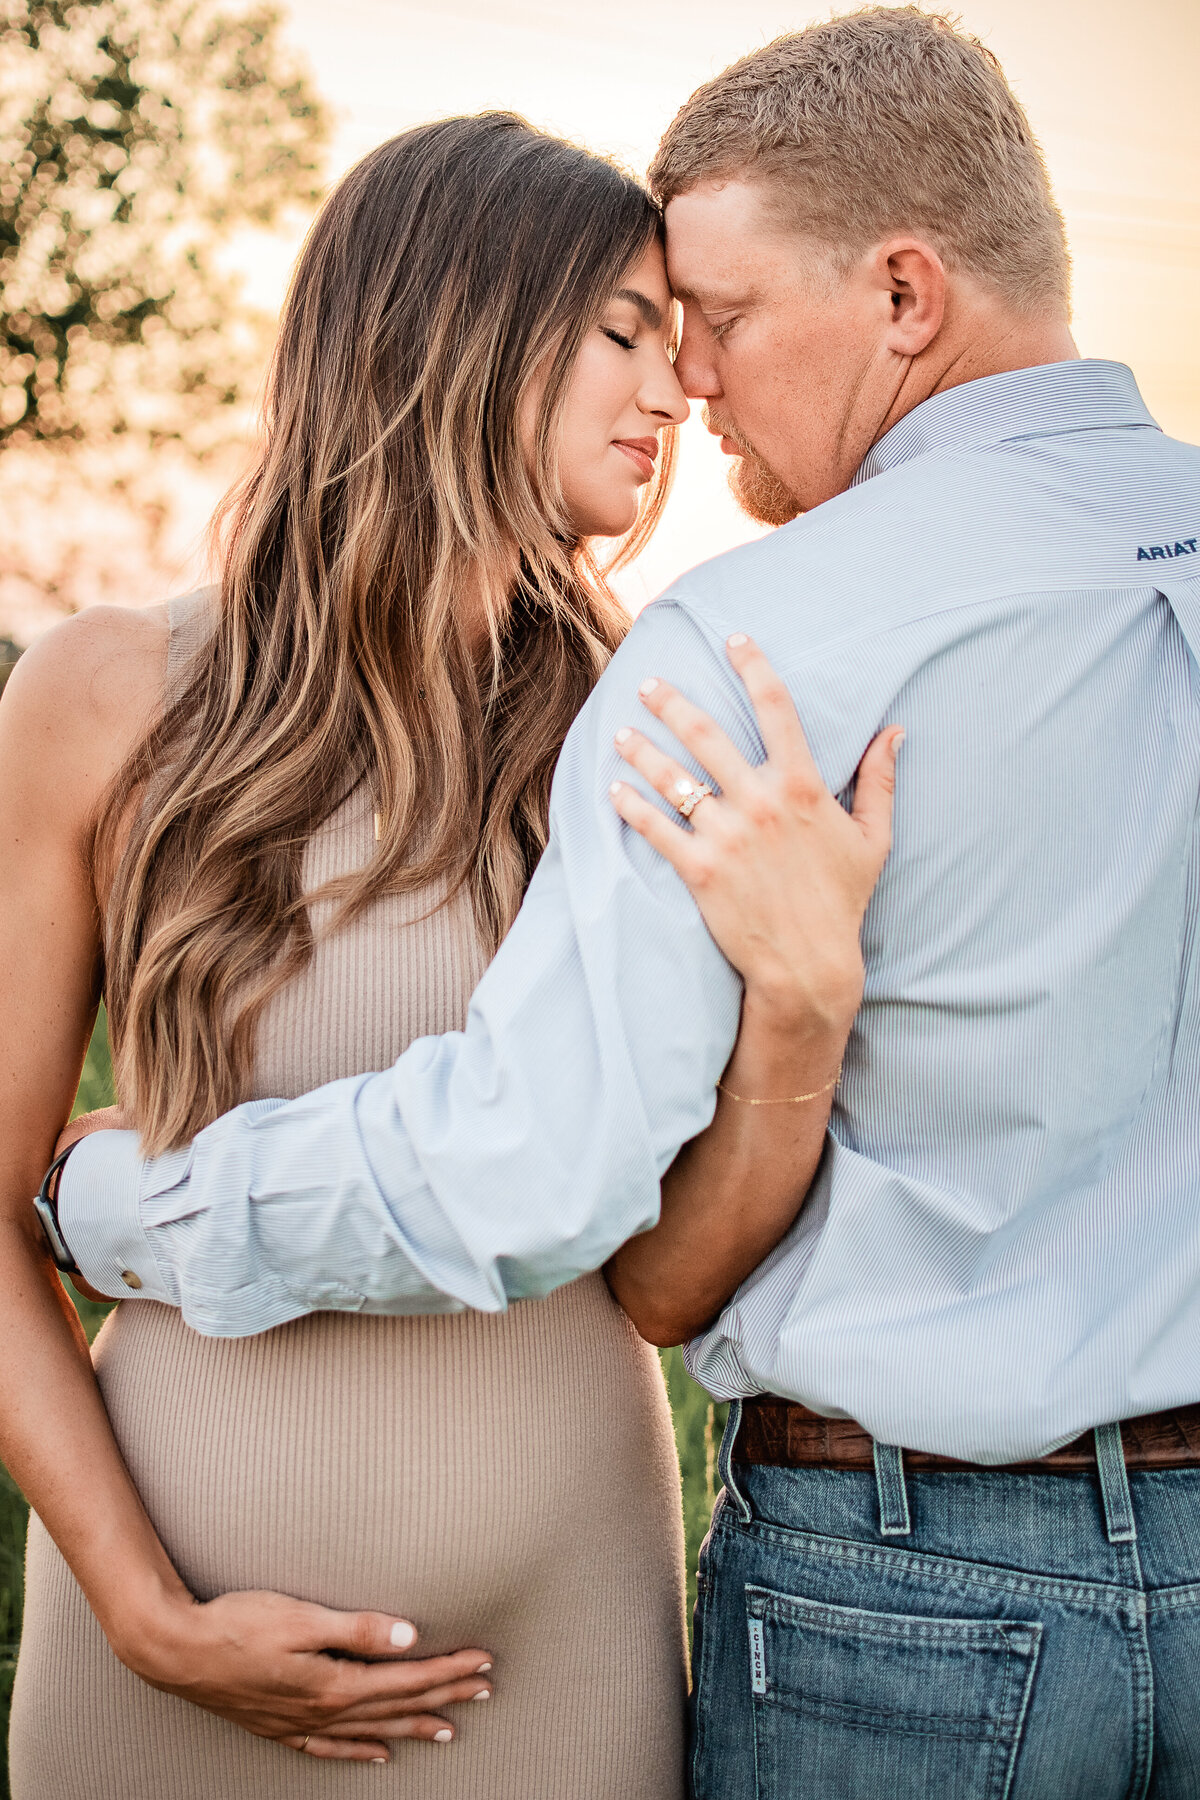 A mom and dad to be touch foreheads and close their eyes as they think about the arrival of their second child.